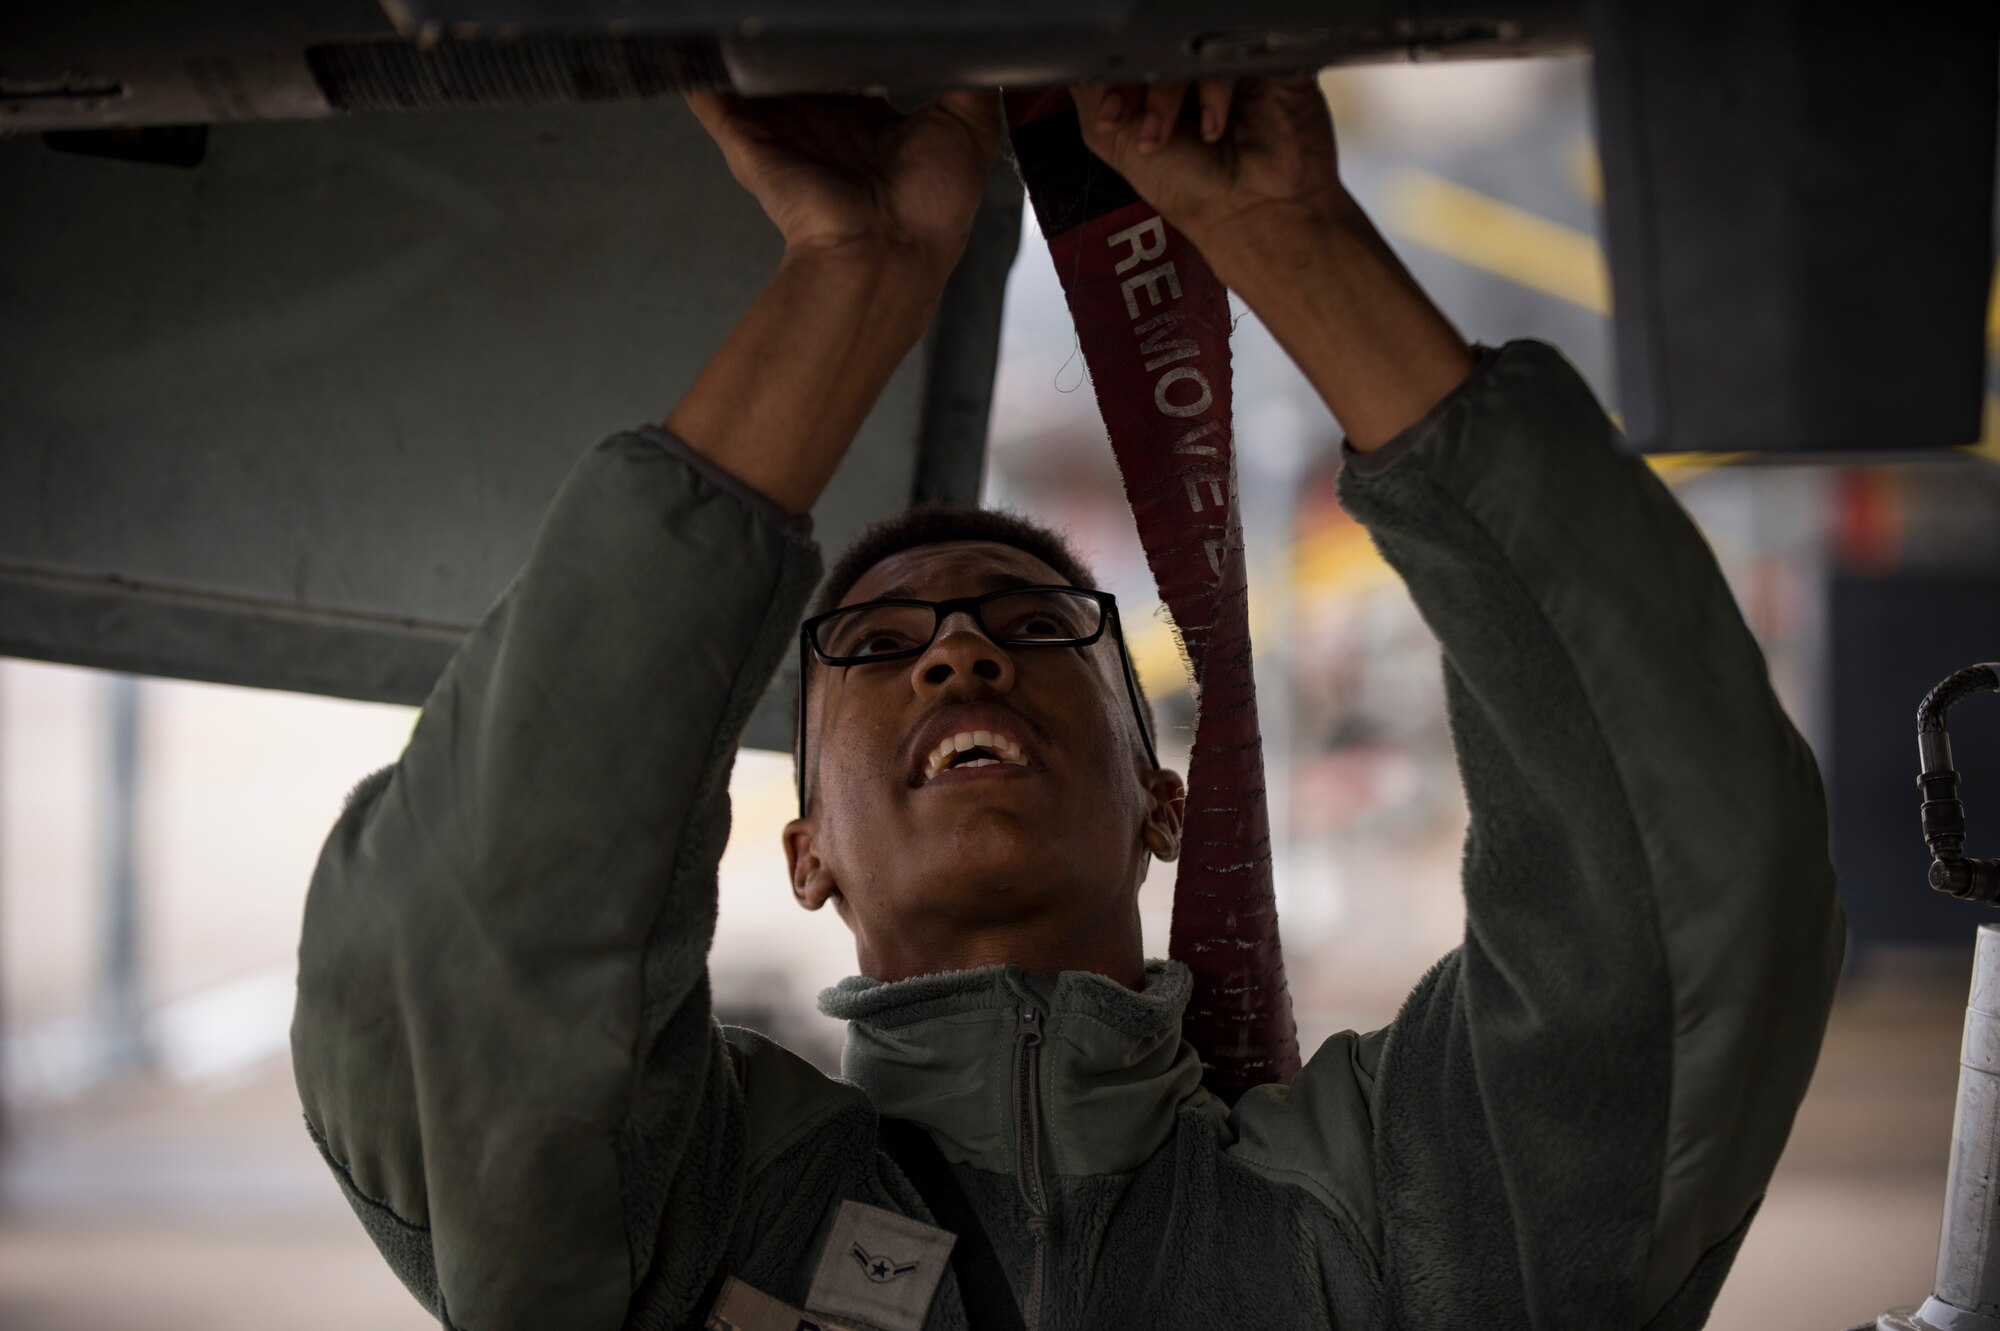 A crew chief from the 23d Aircraft Maintenance Squadron secures a panel on an A-10C Thunderbolt II during a thru flight inspection, Dec. 7, 2017, at Moody Air Force Base, Ga. Moody recently participated in a week-long, Phase 1, Phase 2 exercise designed to demonstrate the 23d Wing’s ability to meet combatant commander objectives. The exercise tested pilots’ and maintainers’ ability to launch around-the-clock sorties at an accelerated rate during surge operations. (U.S. Air Force photo by Andrea Jenkins)